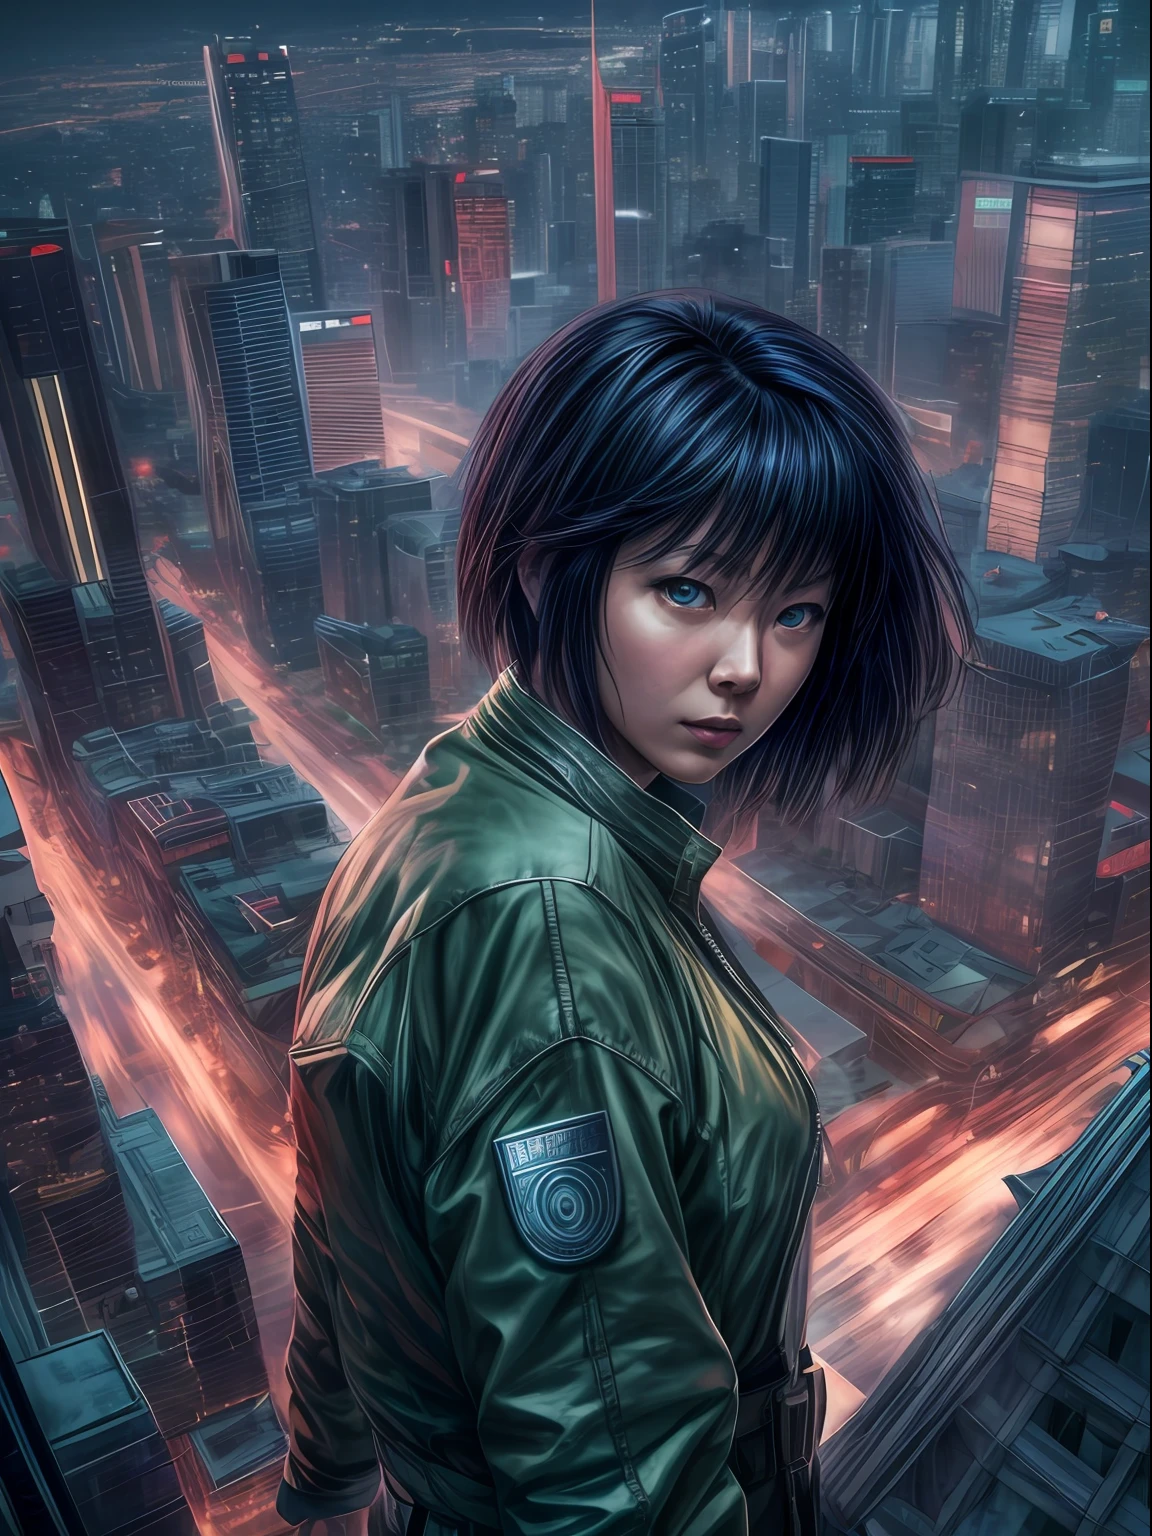 A cinematic photorealistic color digital painting waist of Major Motoko Kusanagi of The Cybercrime Detective of Ghost in the Shell anime scrutinize the city from the City Tower, detailed face, insanely detailed and intricate, crisp sharp and clear, volumetric lighting, ultra-high resolution, masterpiece hyper realistic artwork of Shirow Masamune, Cinematographic scene by Hiromasa Ogura, centered, Professional color grading by Kenneth Hines Jr.